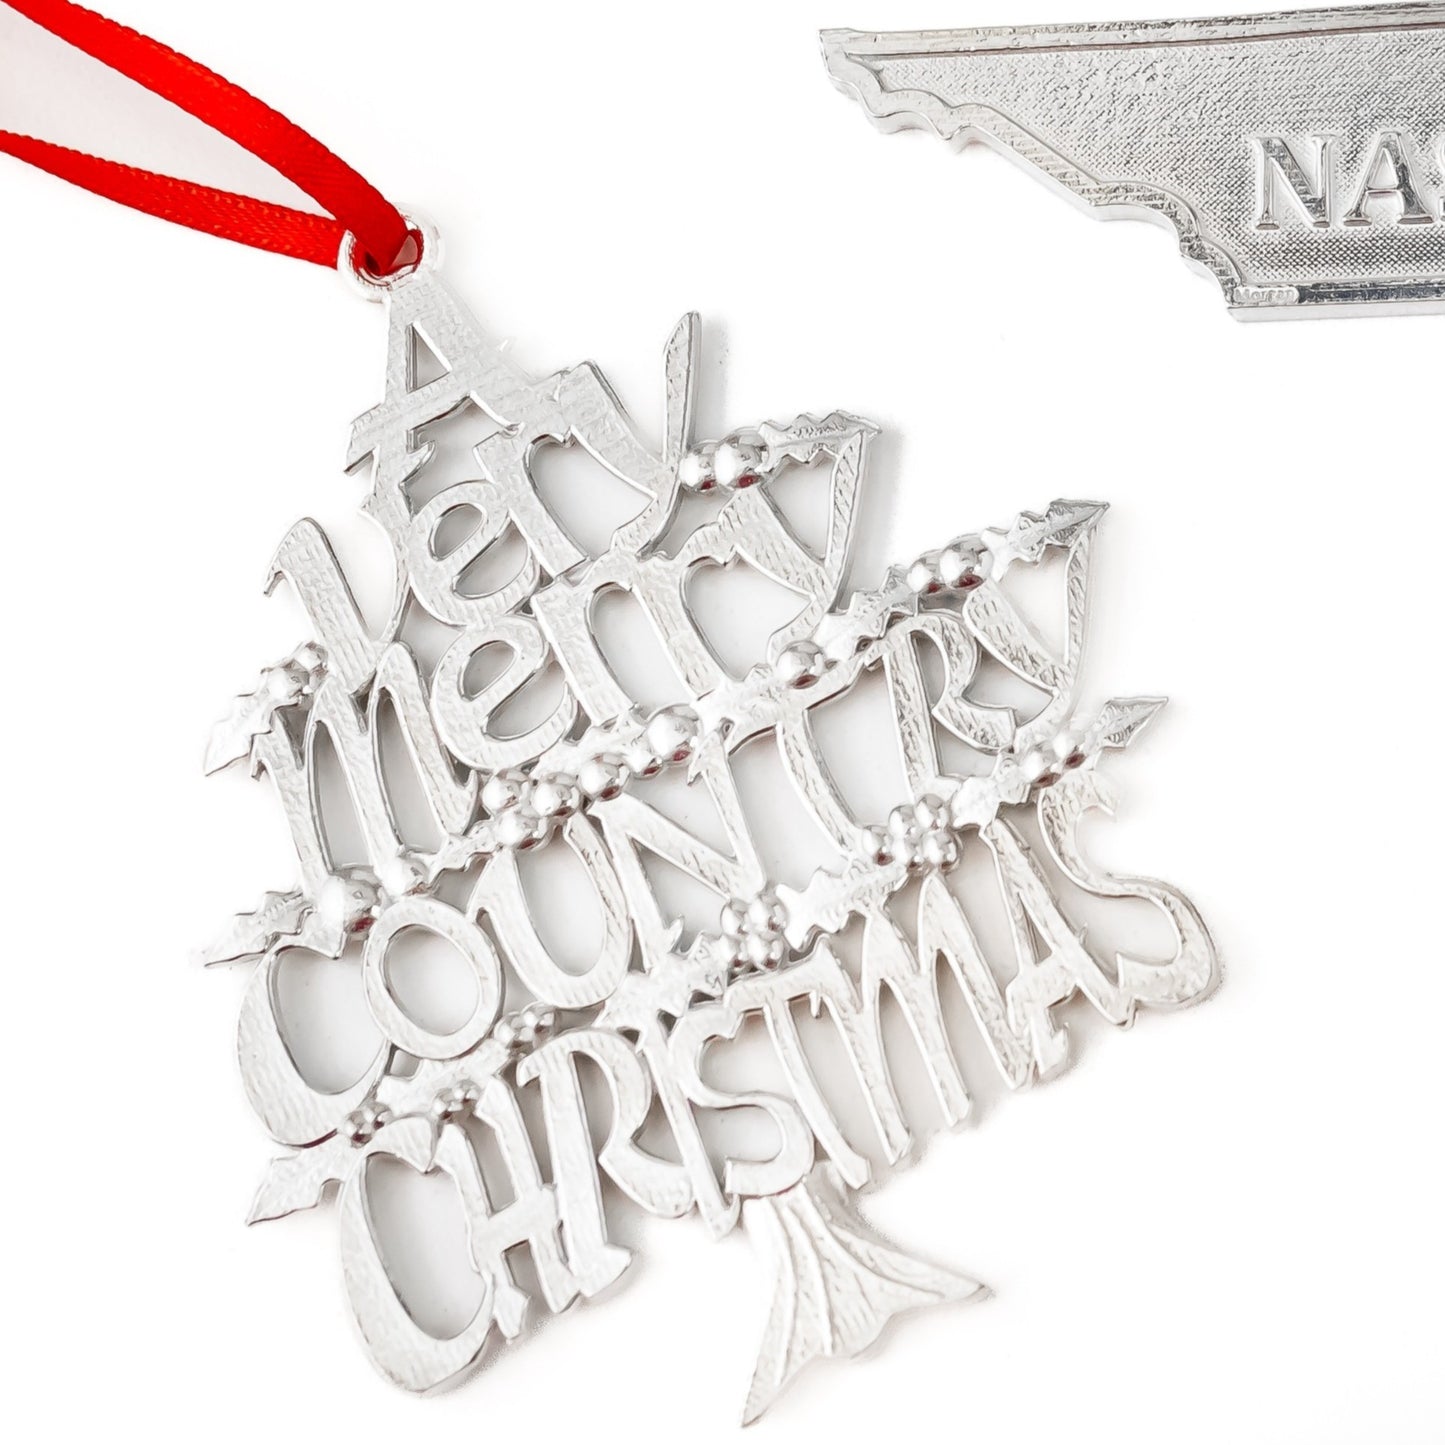 Country Music Ornament